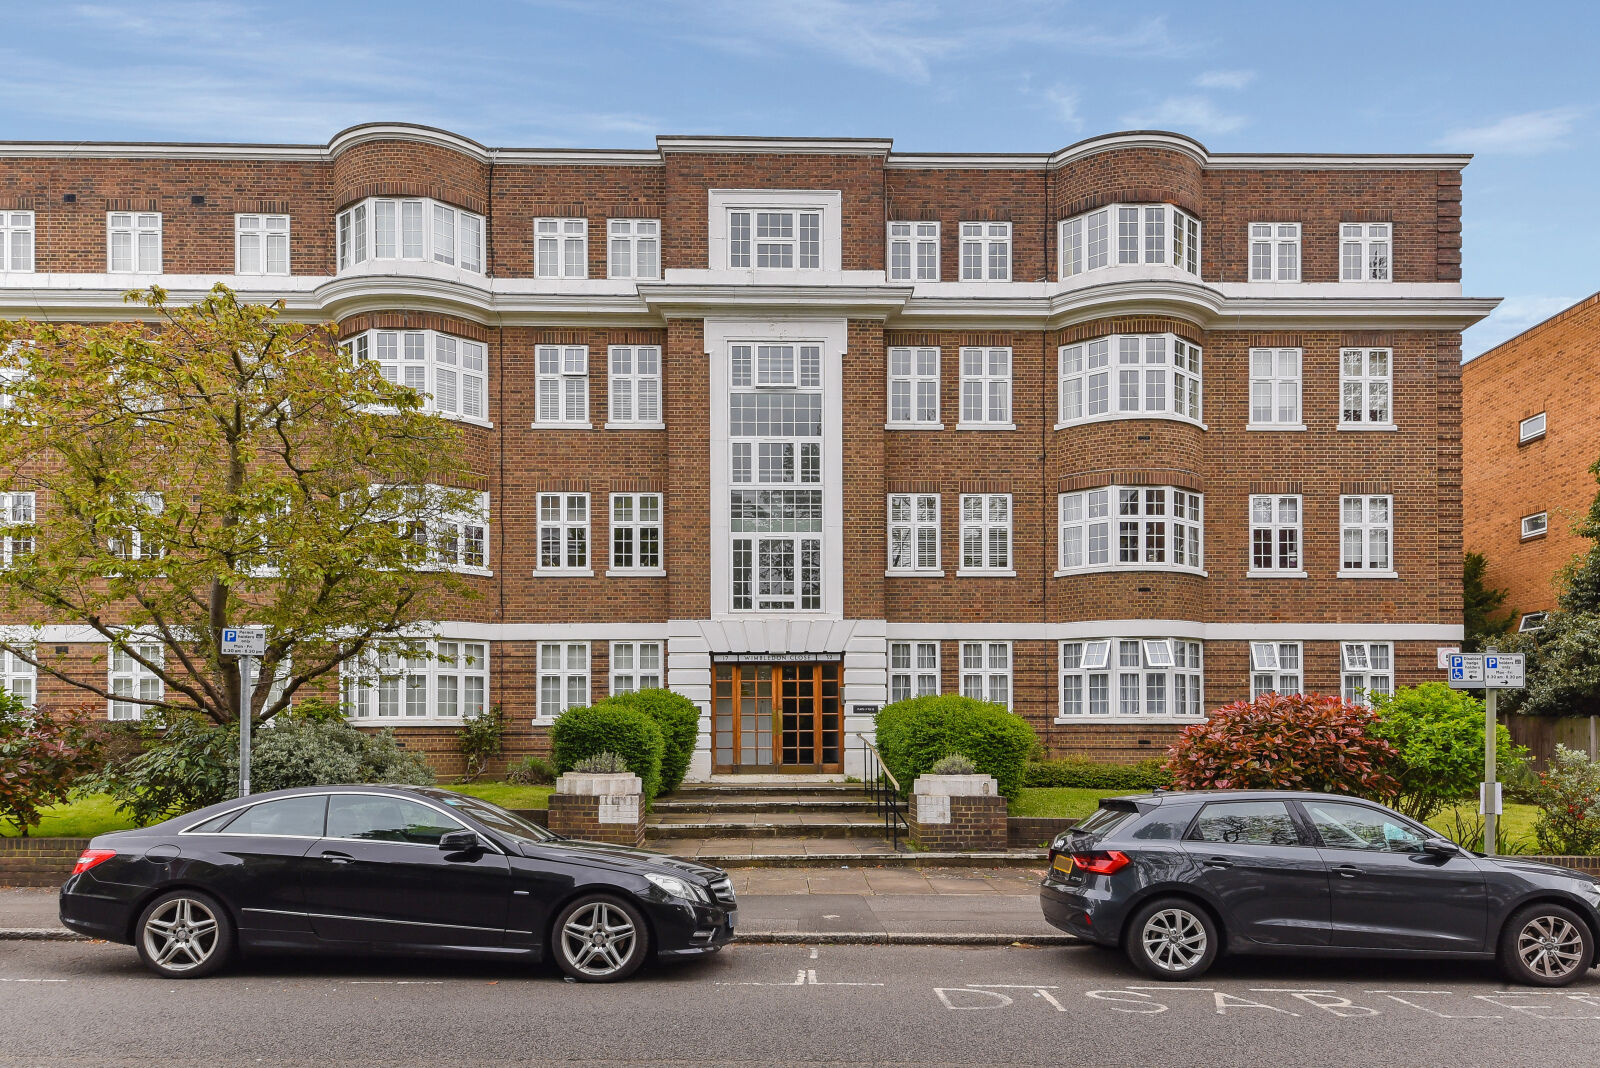 3 bedroom  flat to rent, Available now The Downs, Wimbledon, SW20, main image